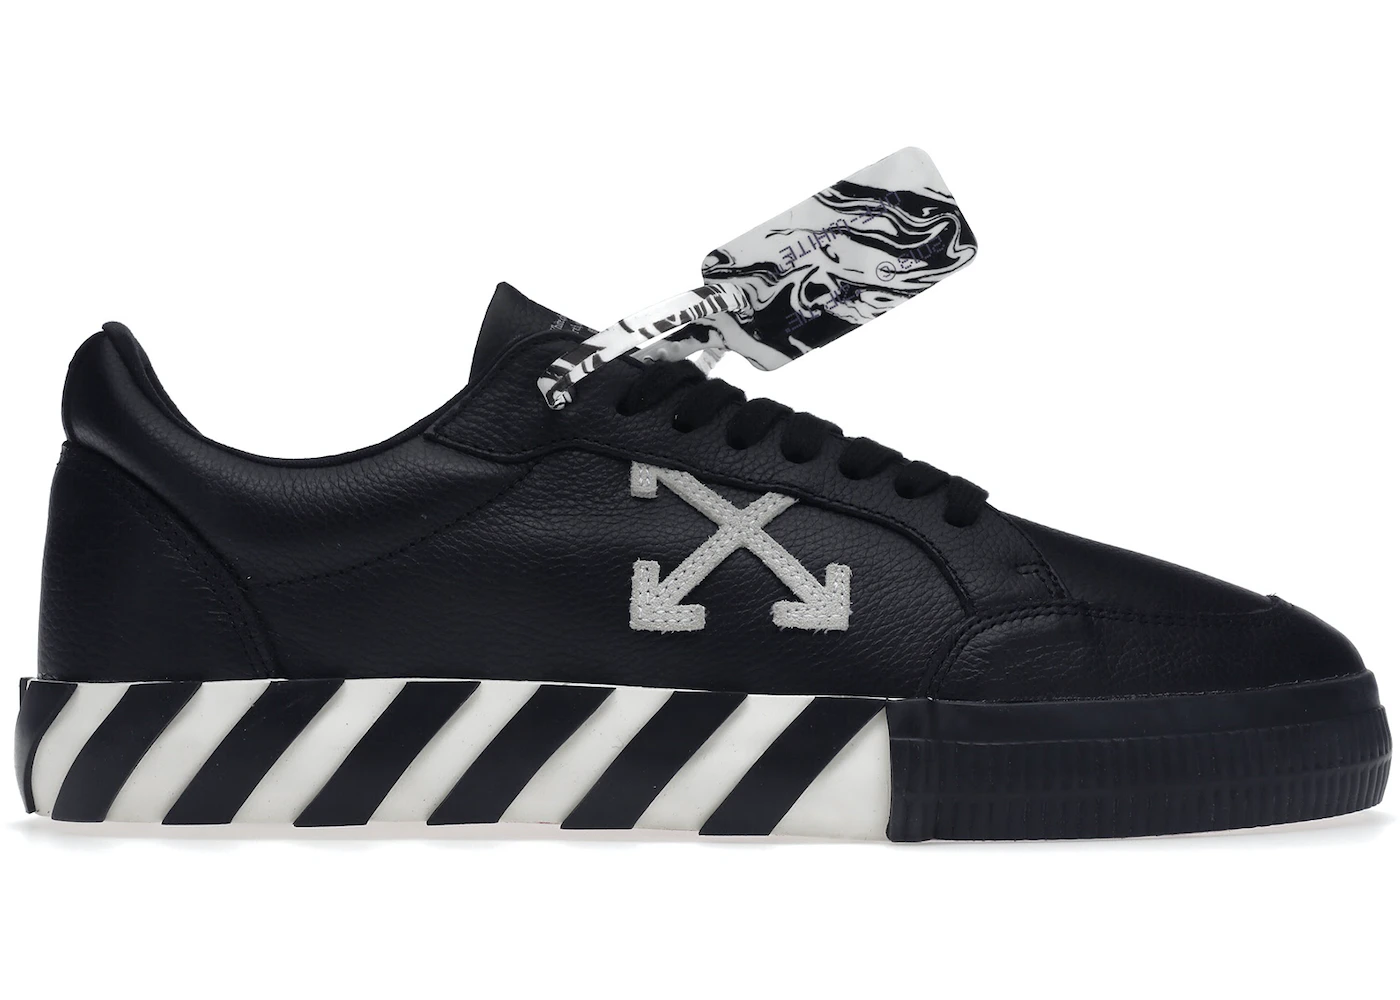 Louis Vuitton X408 Sneaker “The future is here” @virgilabloh Very limited  pieces available worldwide, we believe somewhere in the region of 300., By  Crepslocker